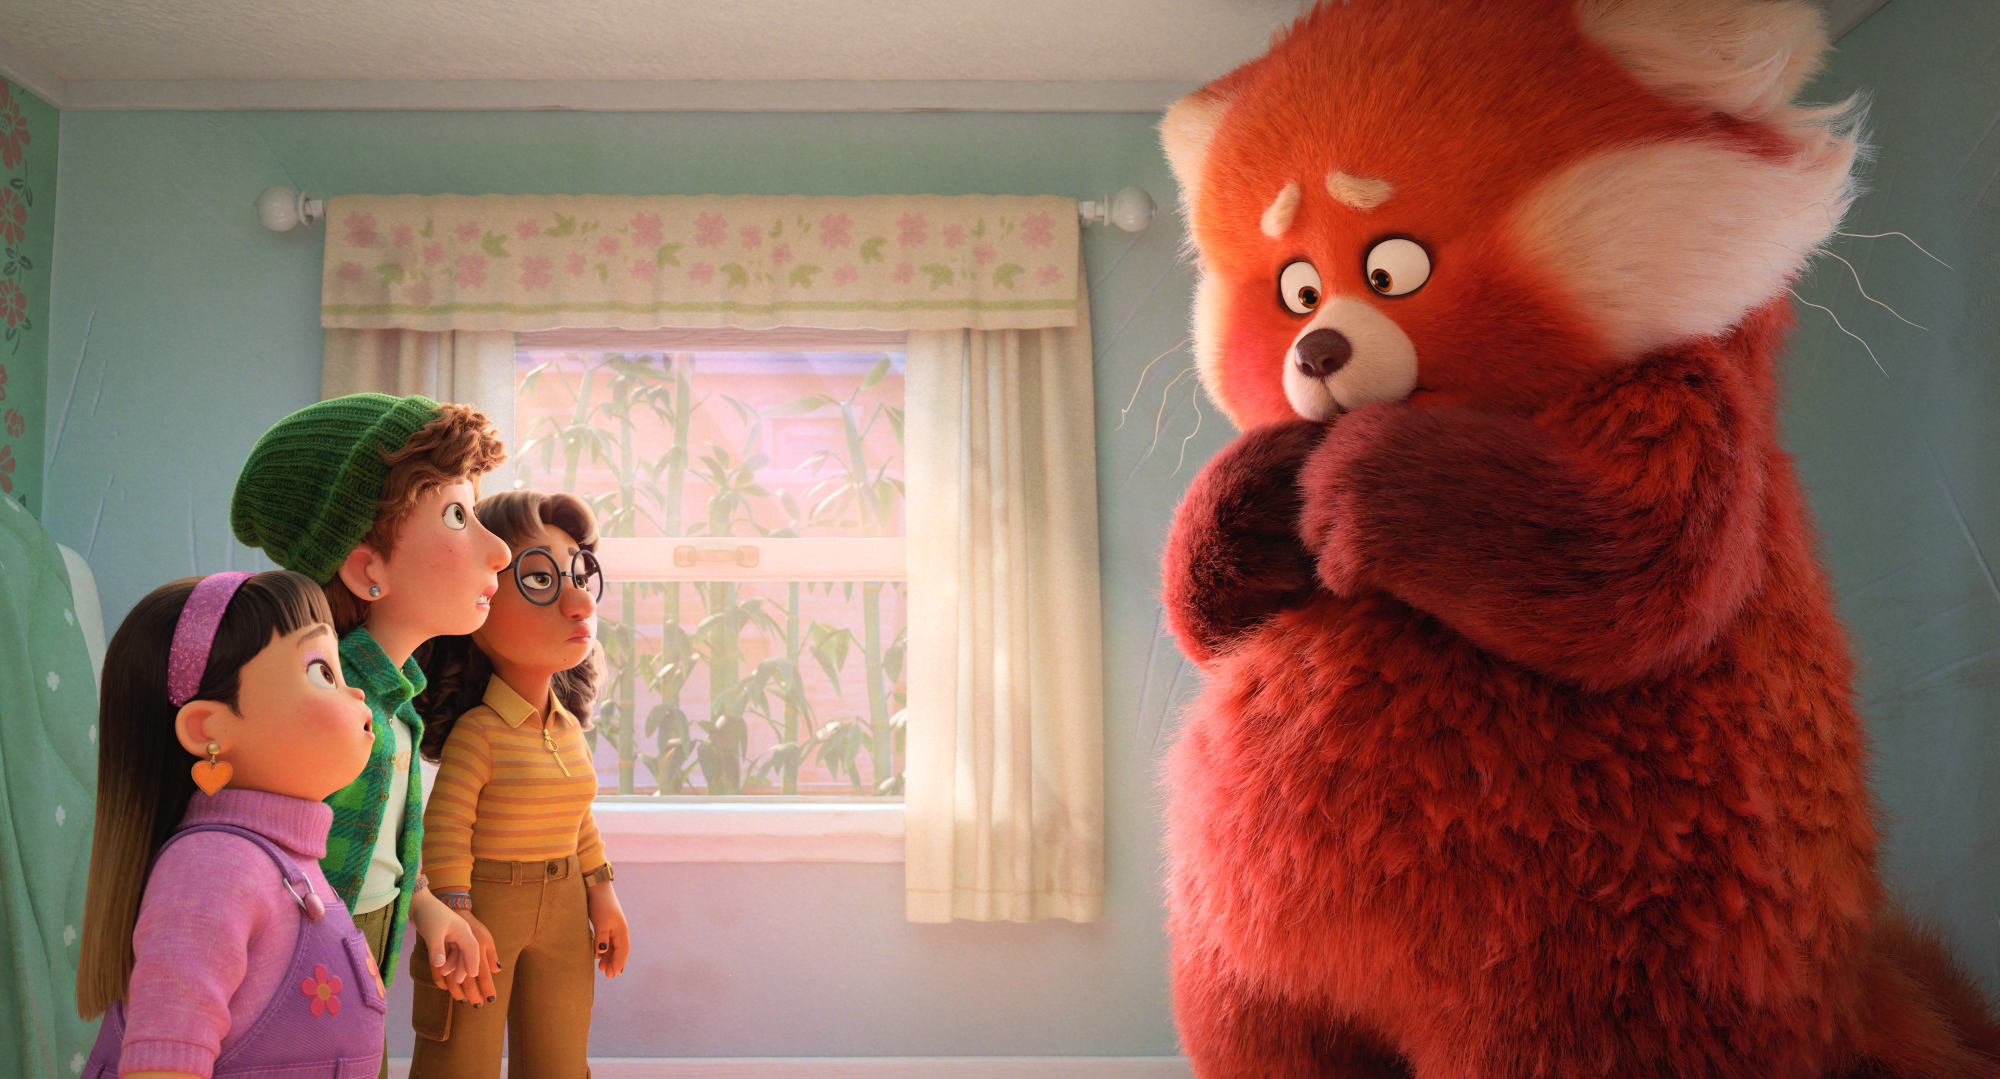 ‘Turning Red’ Movie Review: Pixar Tells an Important Story for the Whole Family